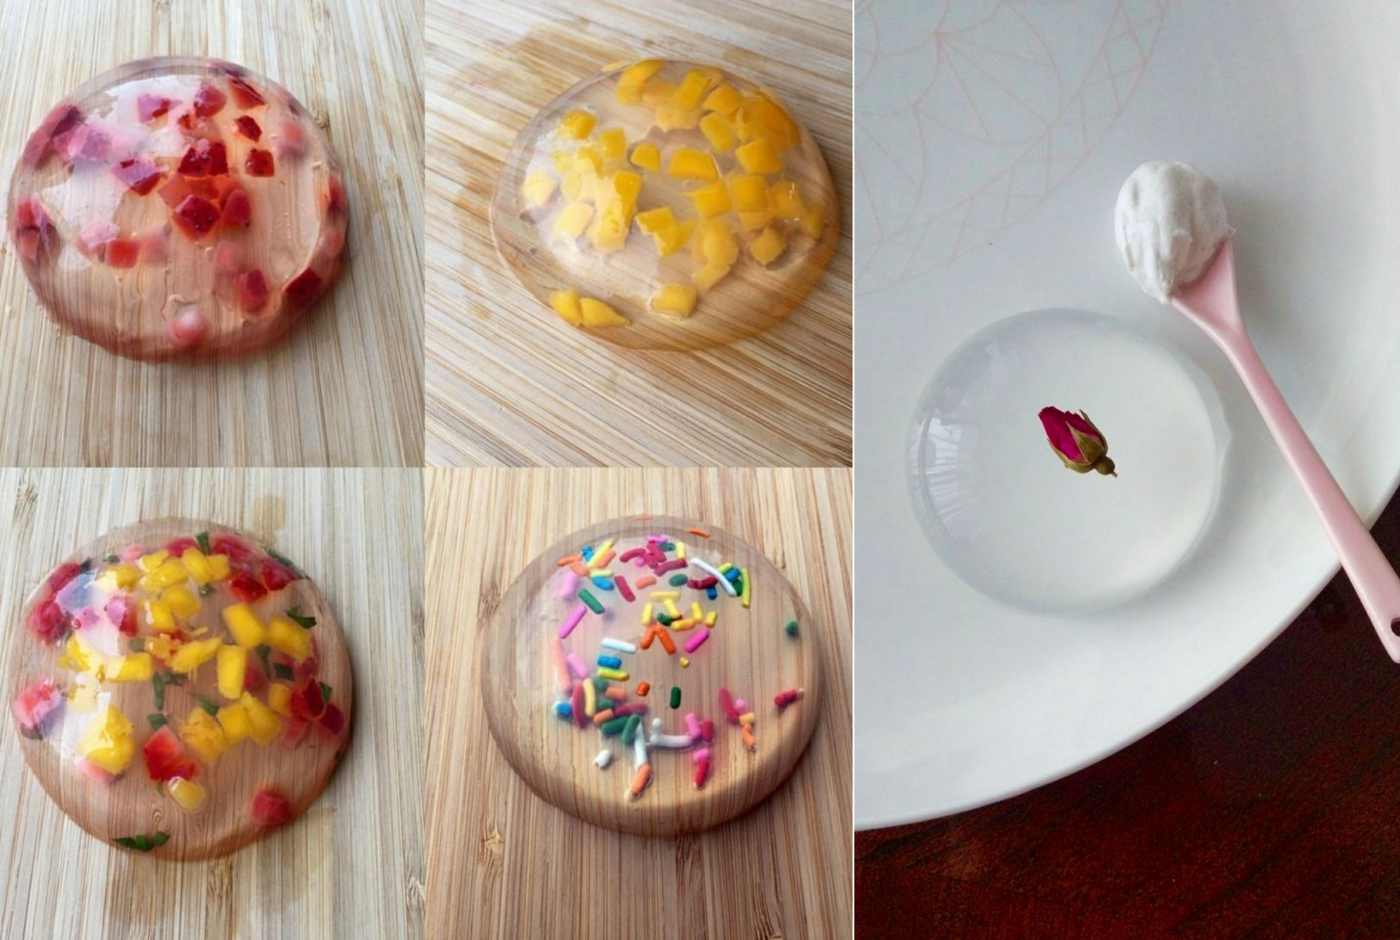 Regenerating Cows with Fruits, Sprinkles or Flowers Decorate